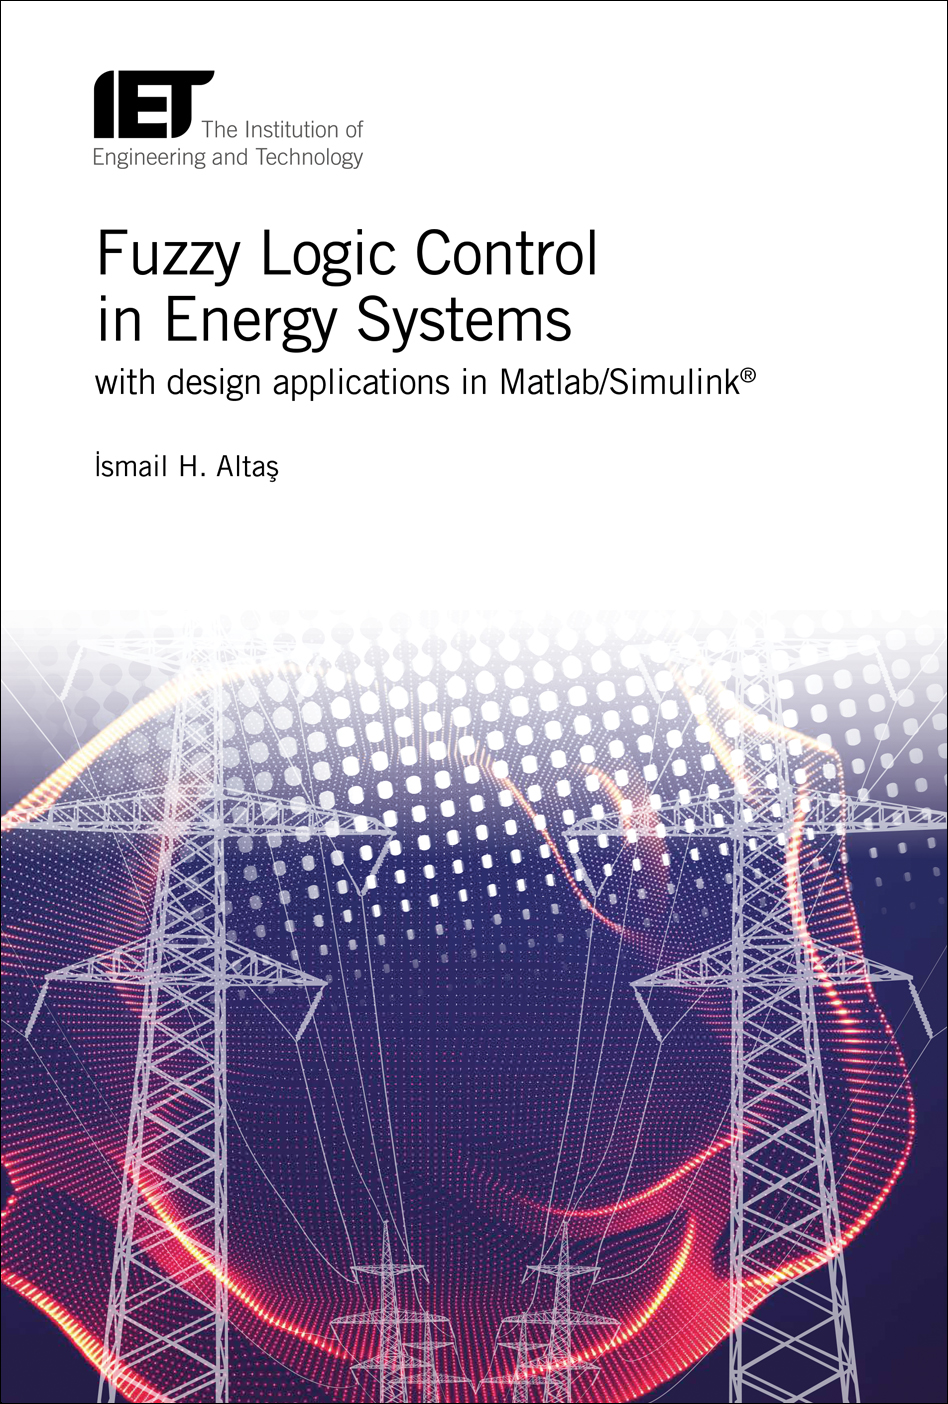 Fuzzy Logic Control in Energy Systems with design applications in MATLAB®/Simulink®